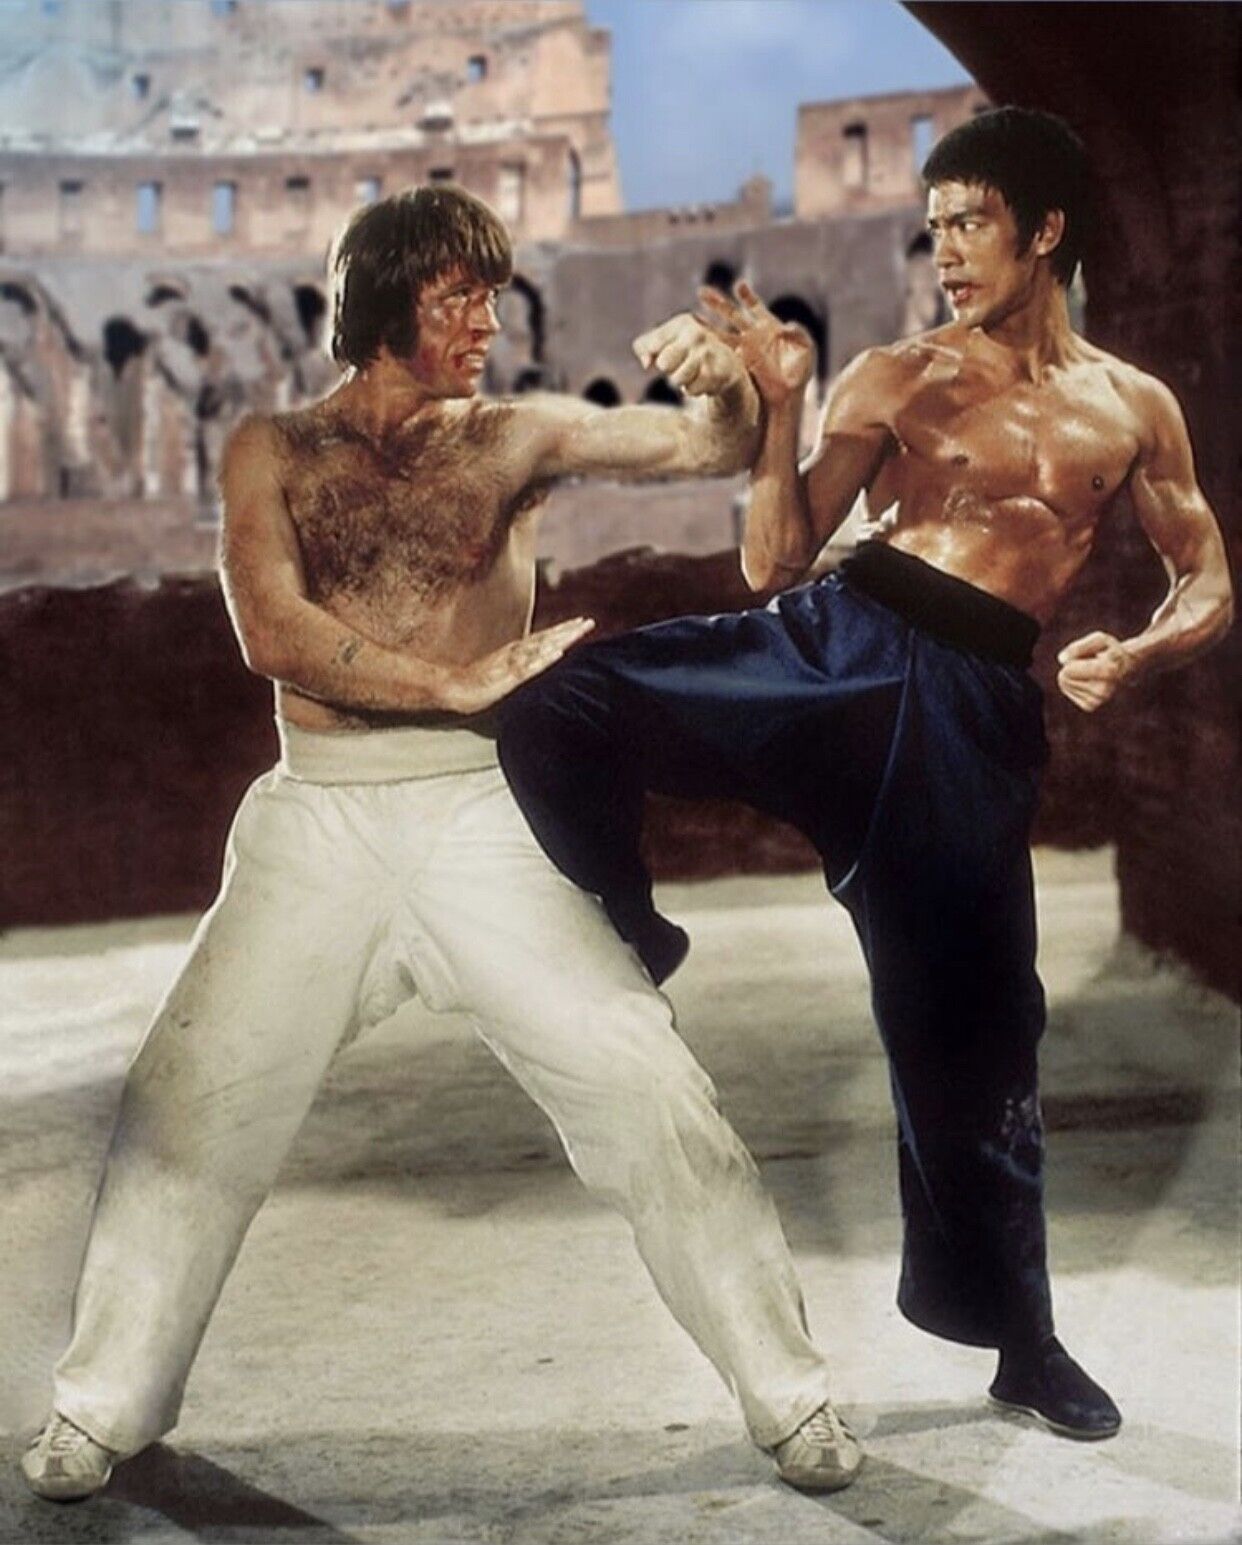 BRUCE LEE CHUCK NORRIS THE WAY OF THE DRAGON 8x10 GLOSSY PHOTO